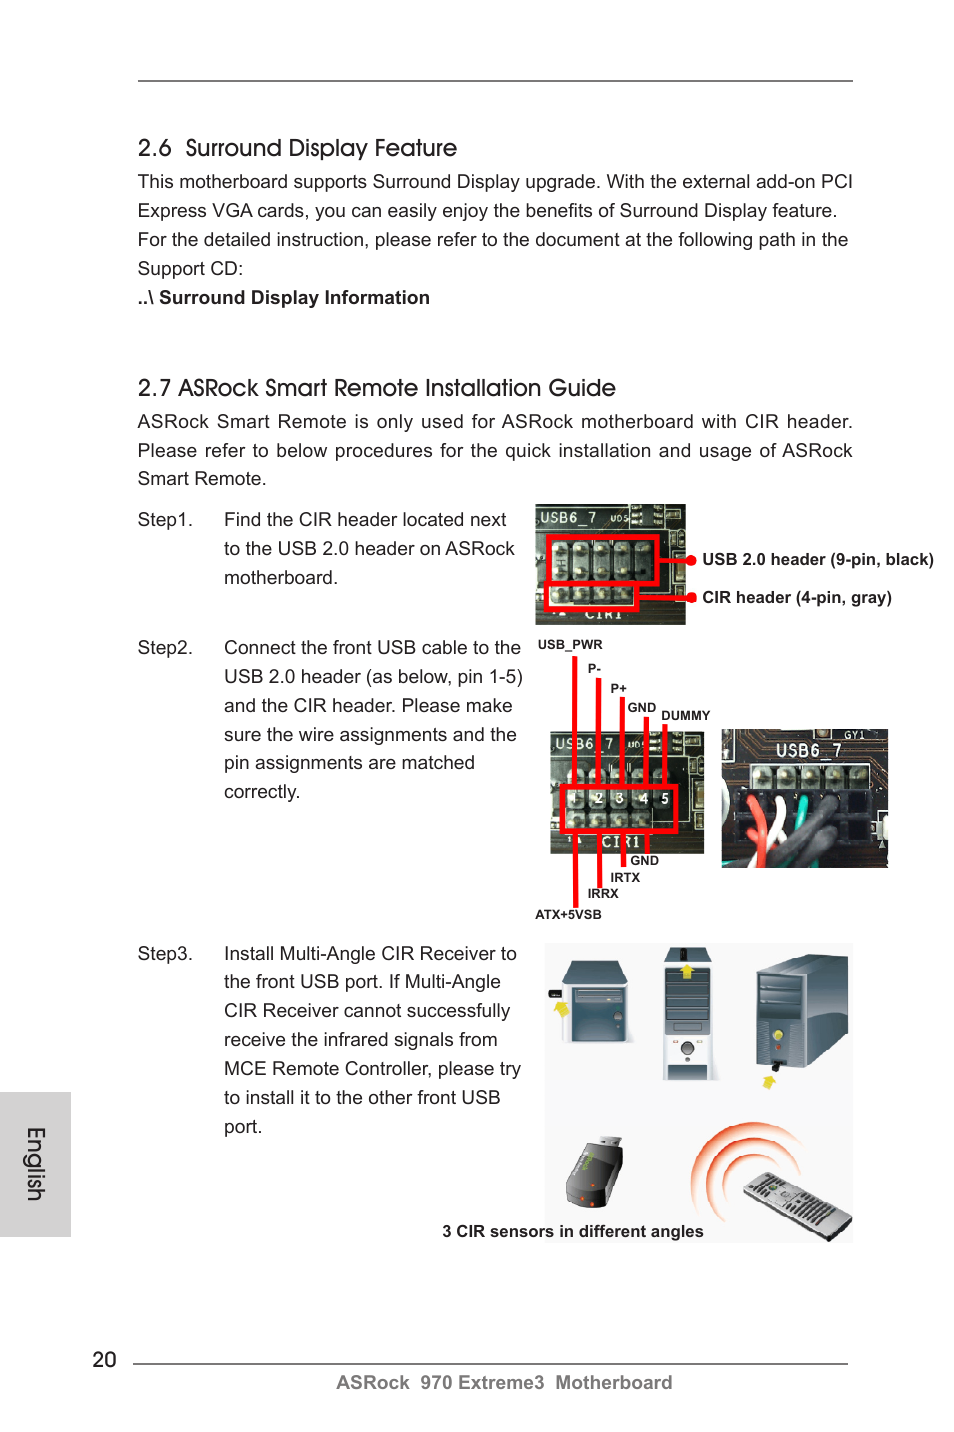 English, 7 asrock smart remote installation guide, 6 surround display  feature | ASRock 970 Extreme3 User Manual | Page 20 / 176 | Original mode